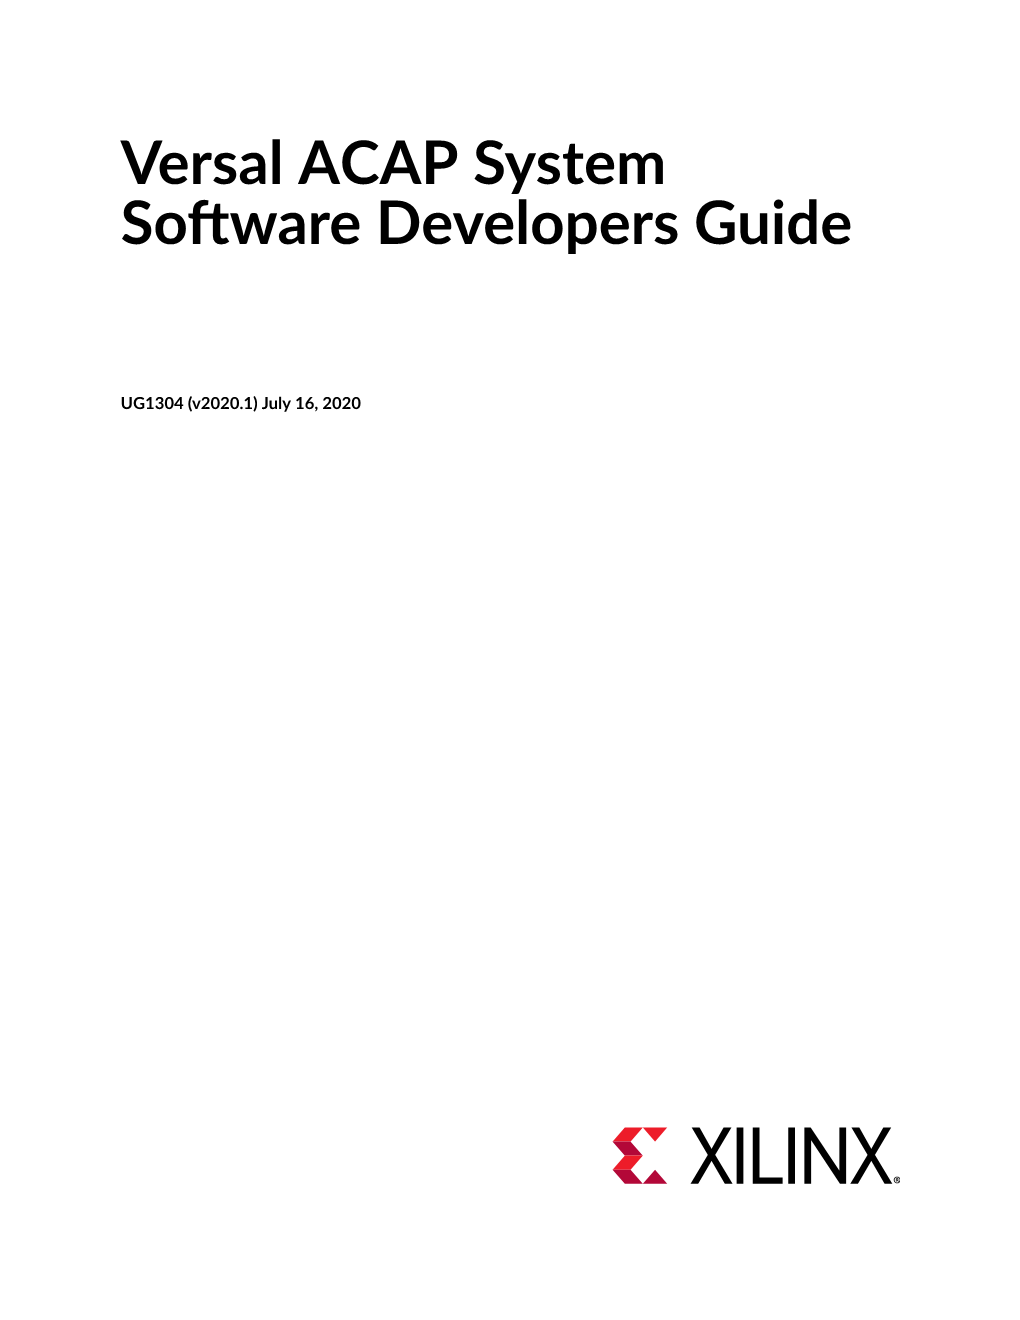 Versal ACAP System Software Developers Guide